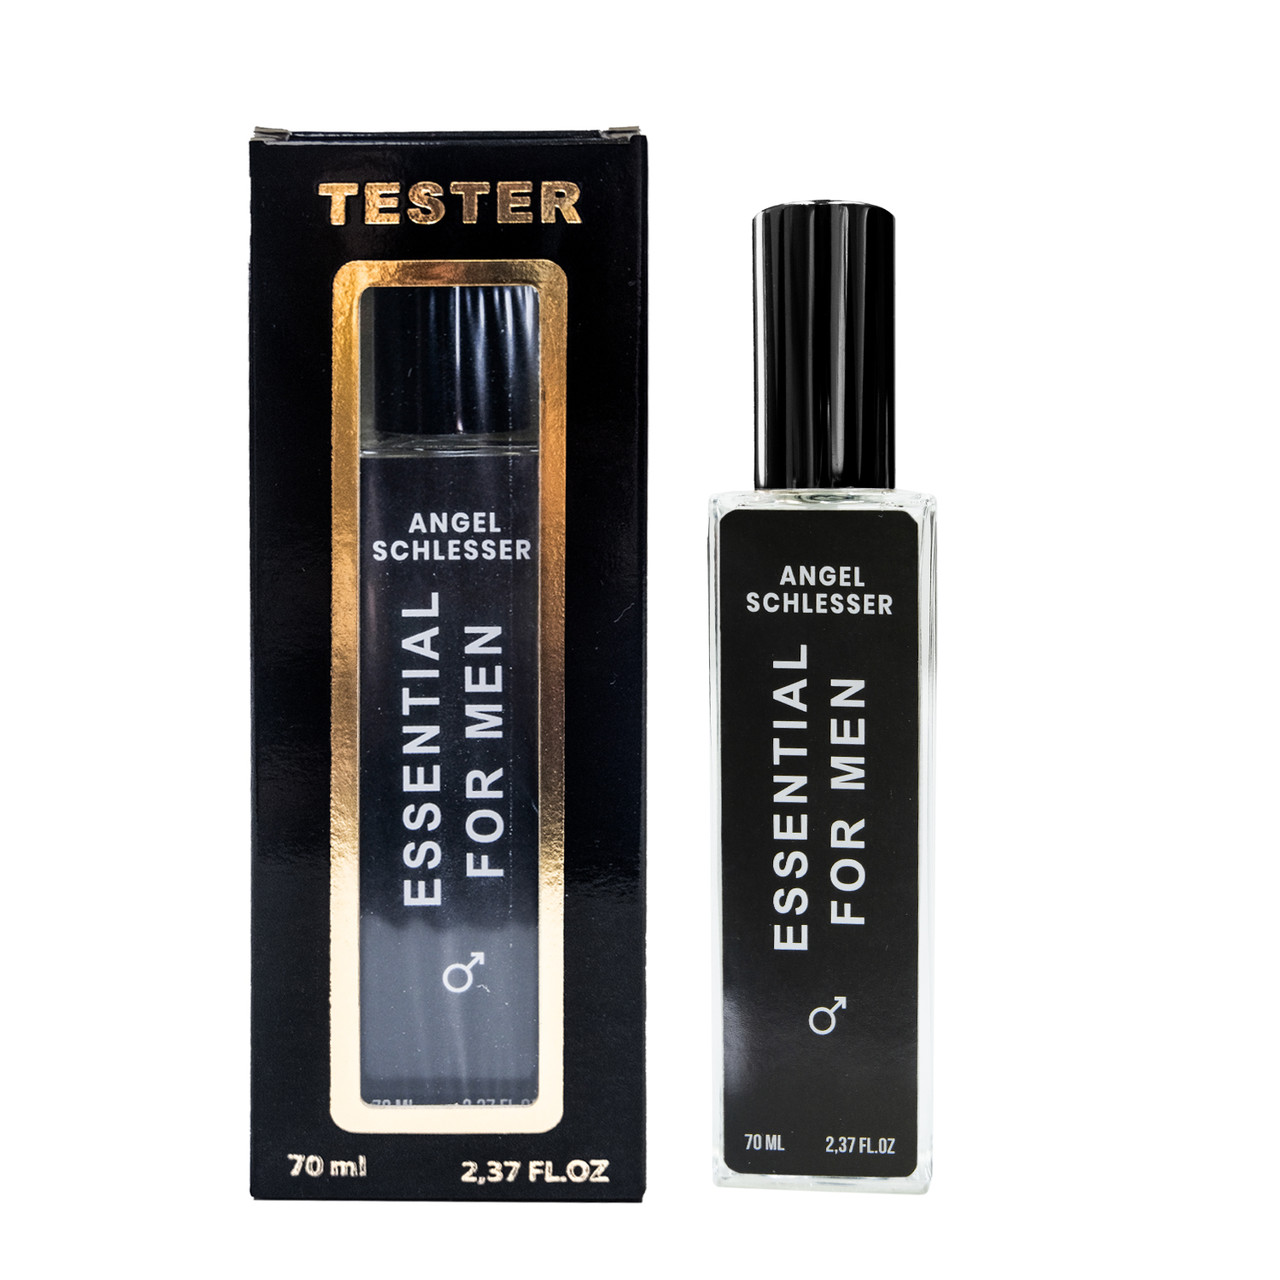 Tester French Angel Schlesser Essential For Men мужской 70 мл - фото 1 - id-p1477841108